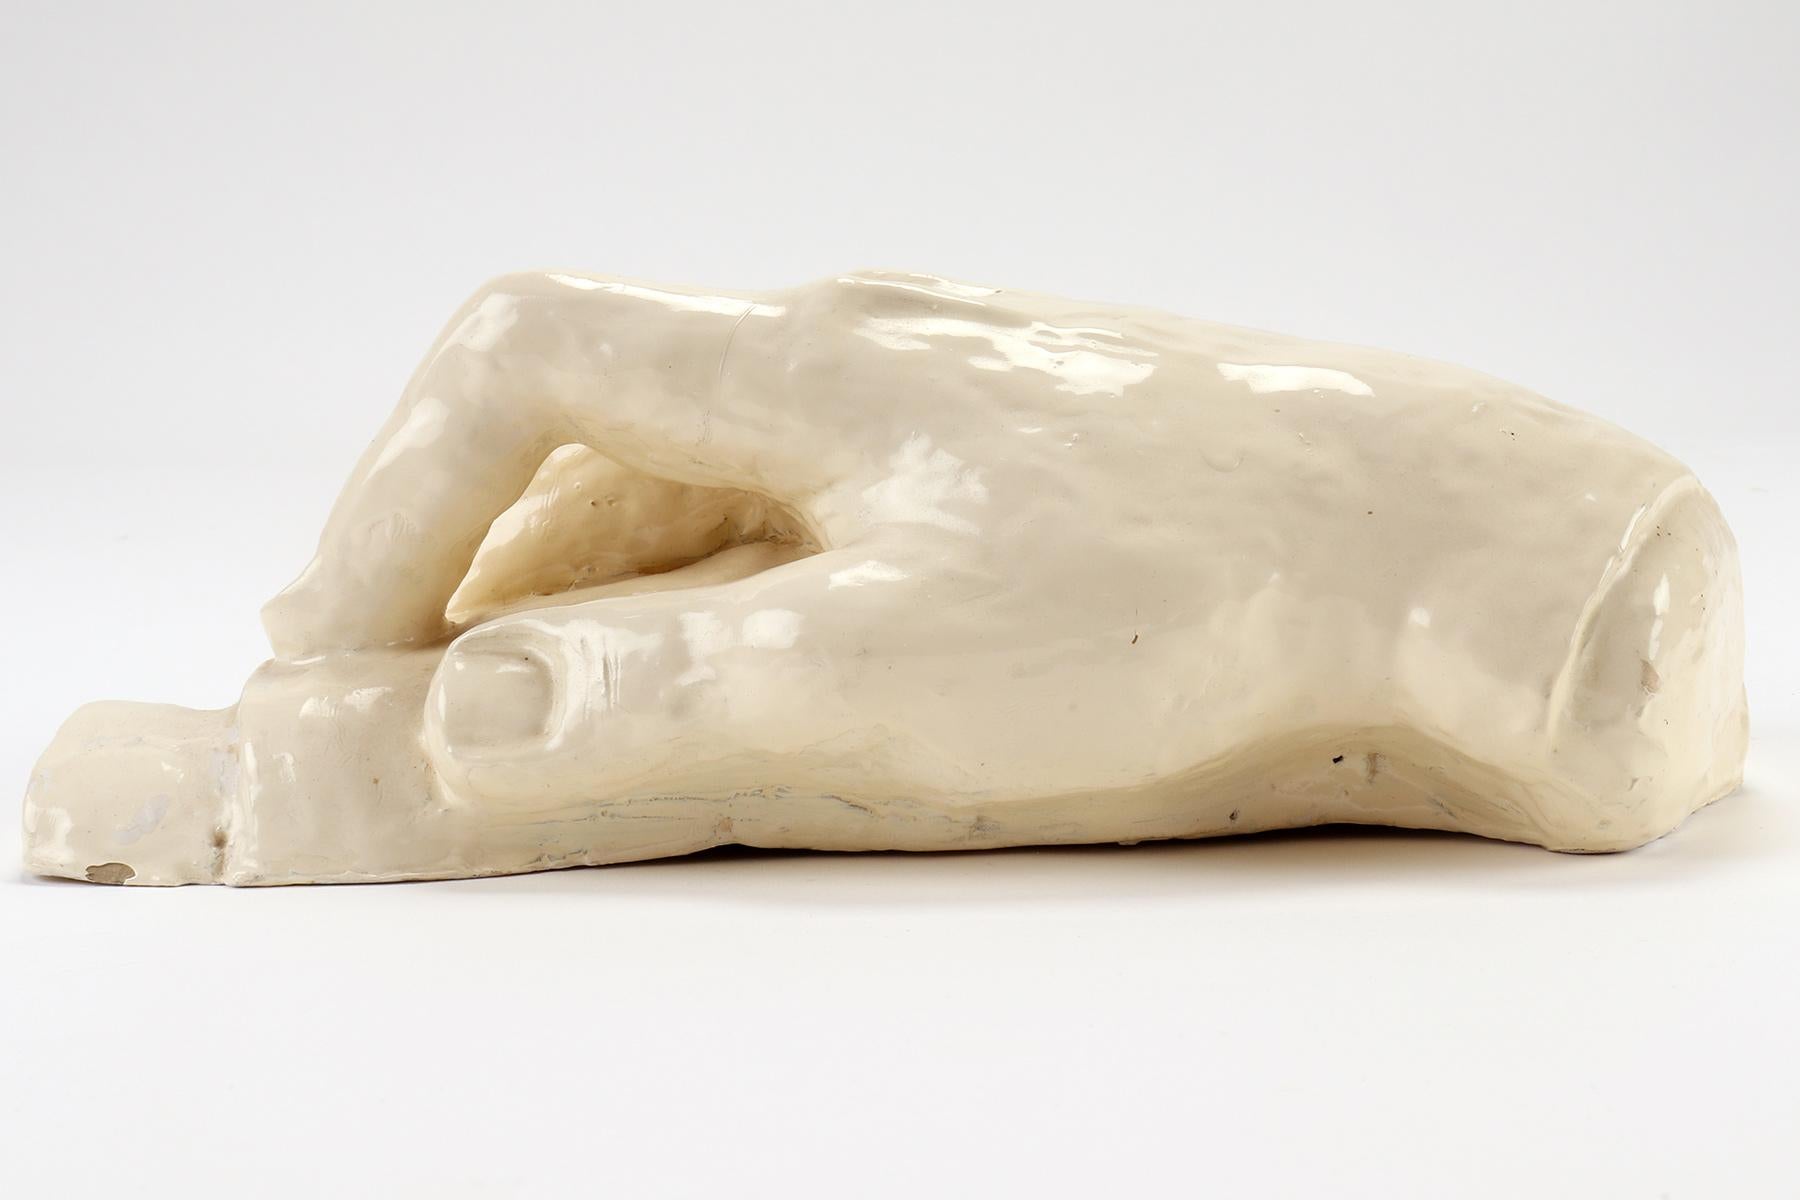 Italian Glazed Clay Sculpture Depicting a Hand, Italy 1900 For Sale